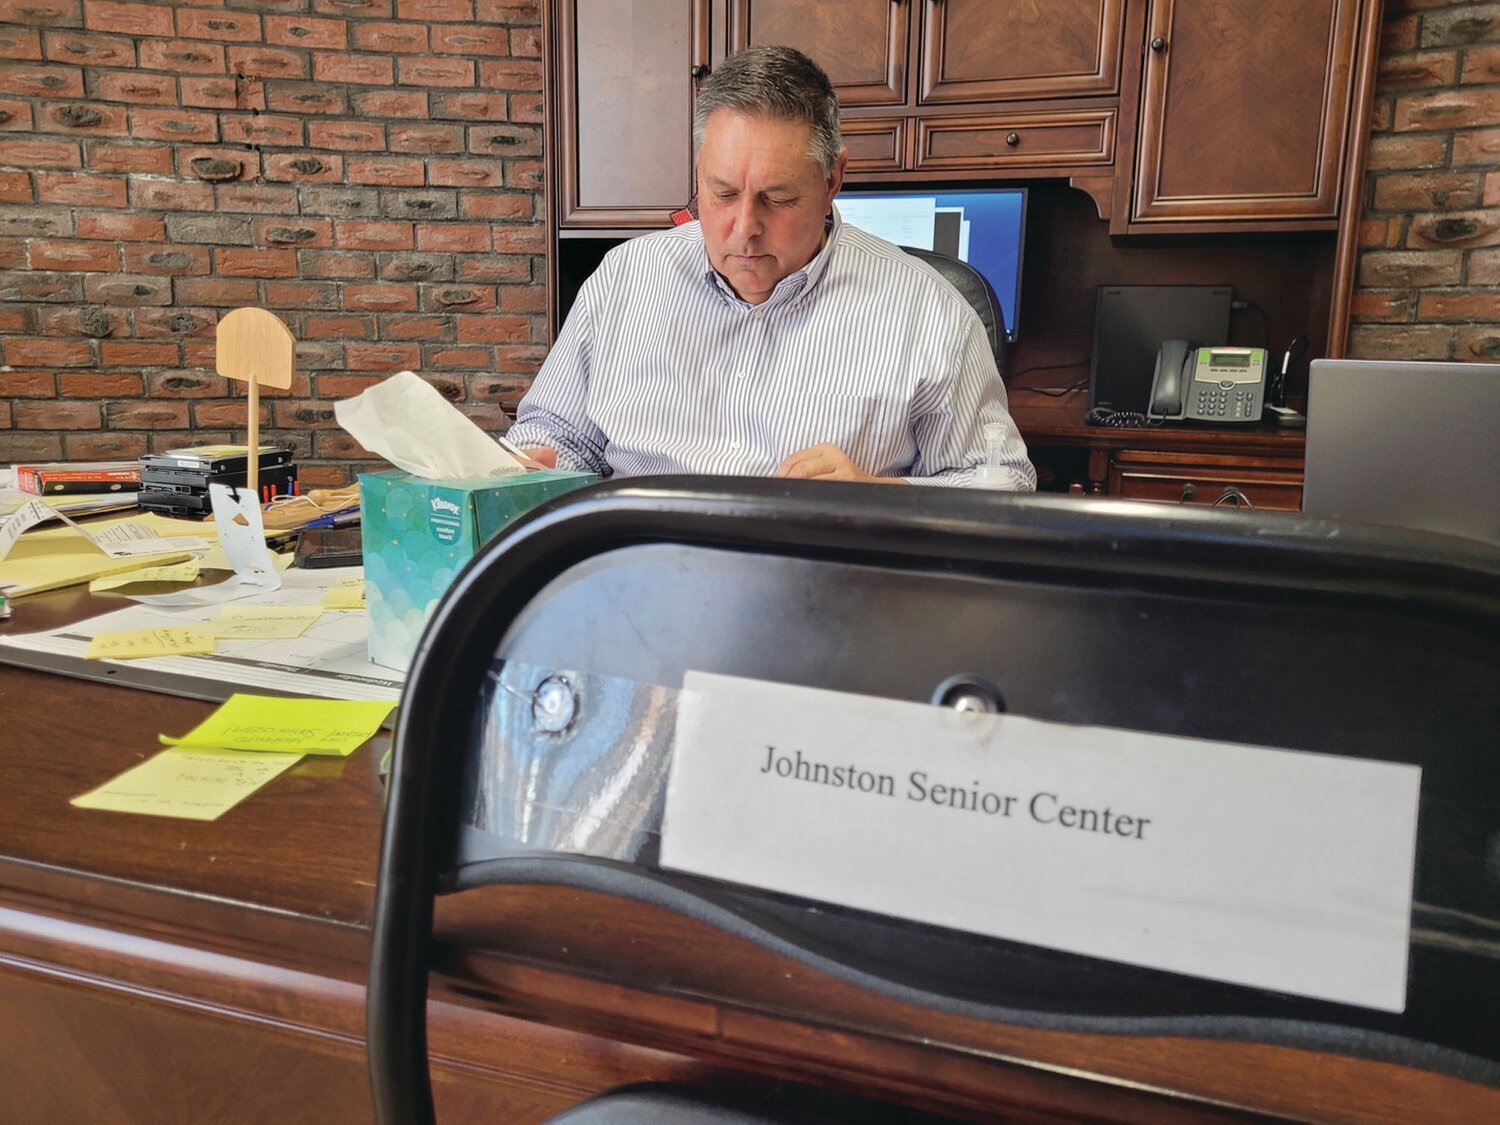 DOUBLE DUTY: Richard J. DelFino Jr. was appointed Johnston Senior Center Executive Director at the start of 2023. He was recently named Chairman of the Johnston Charter Review Commission.